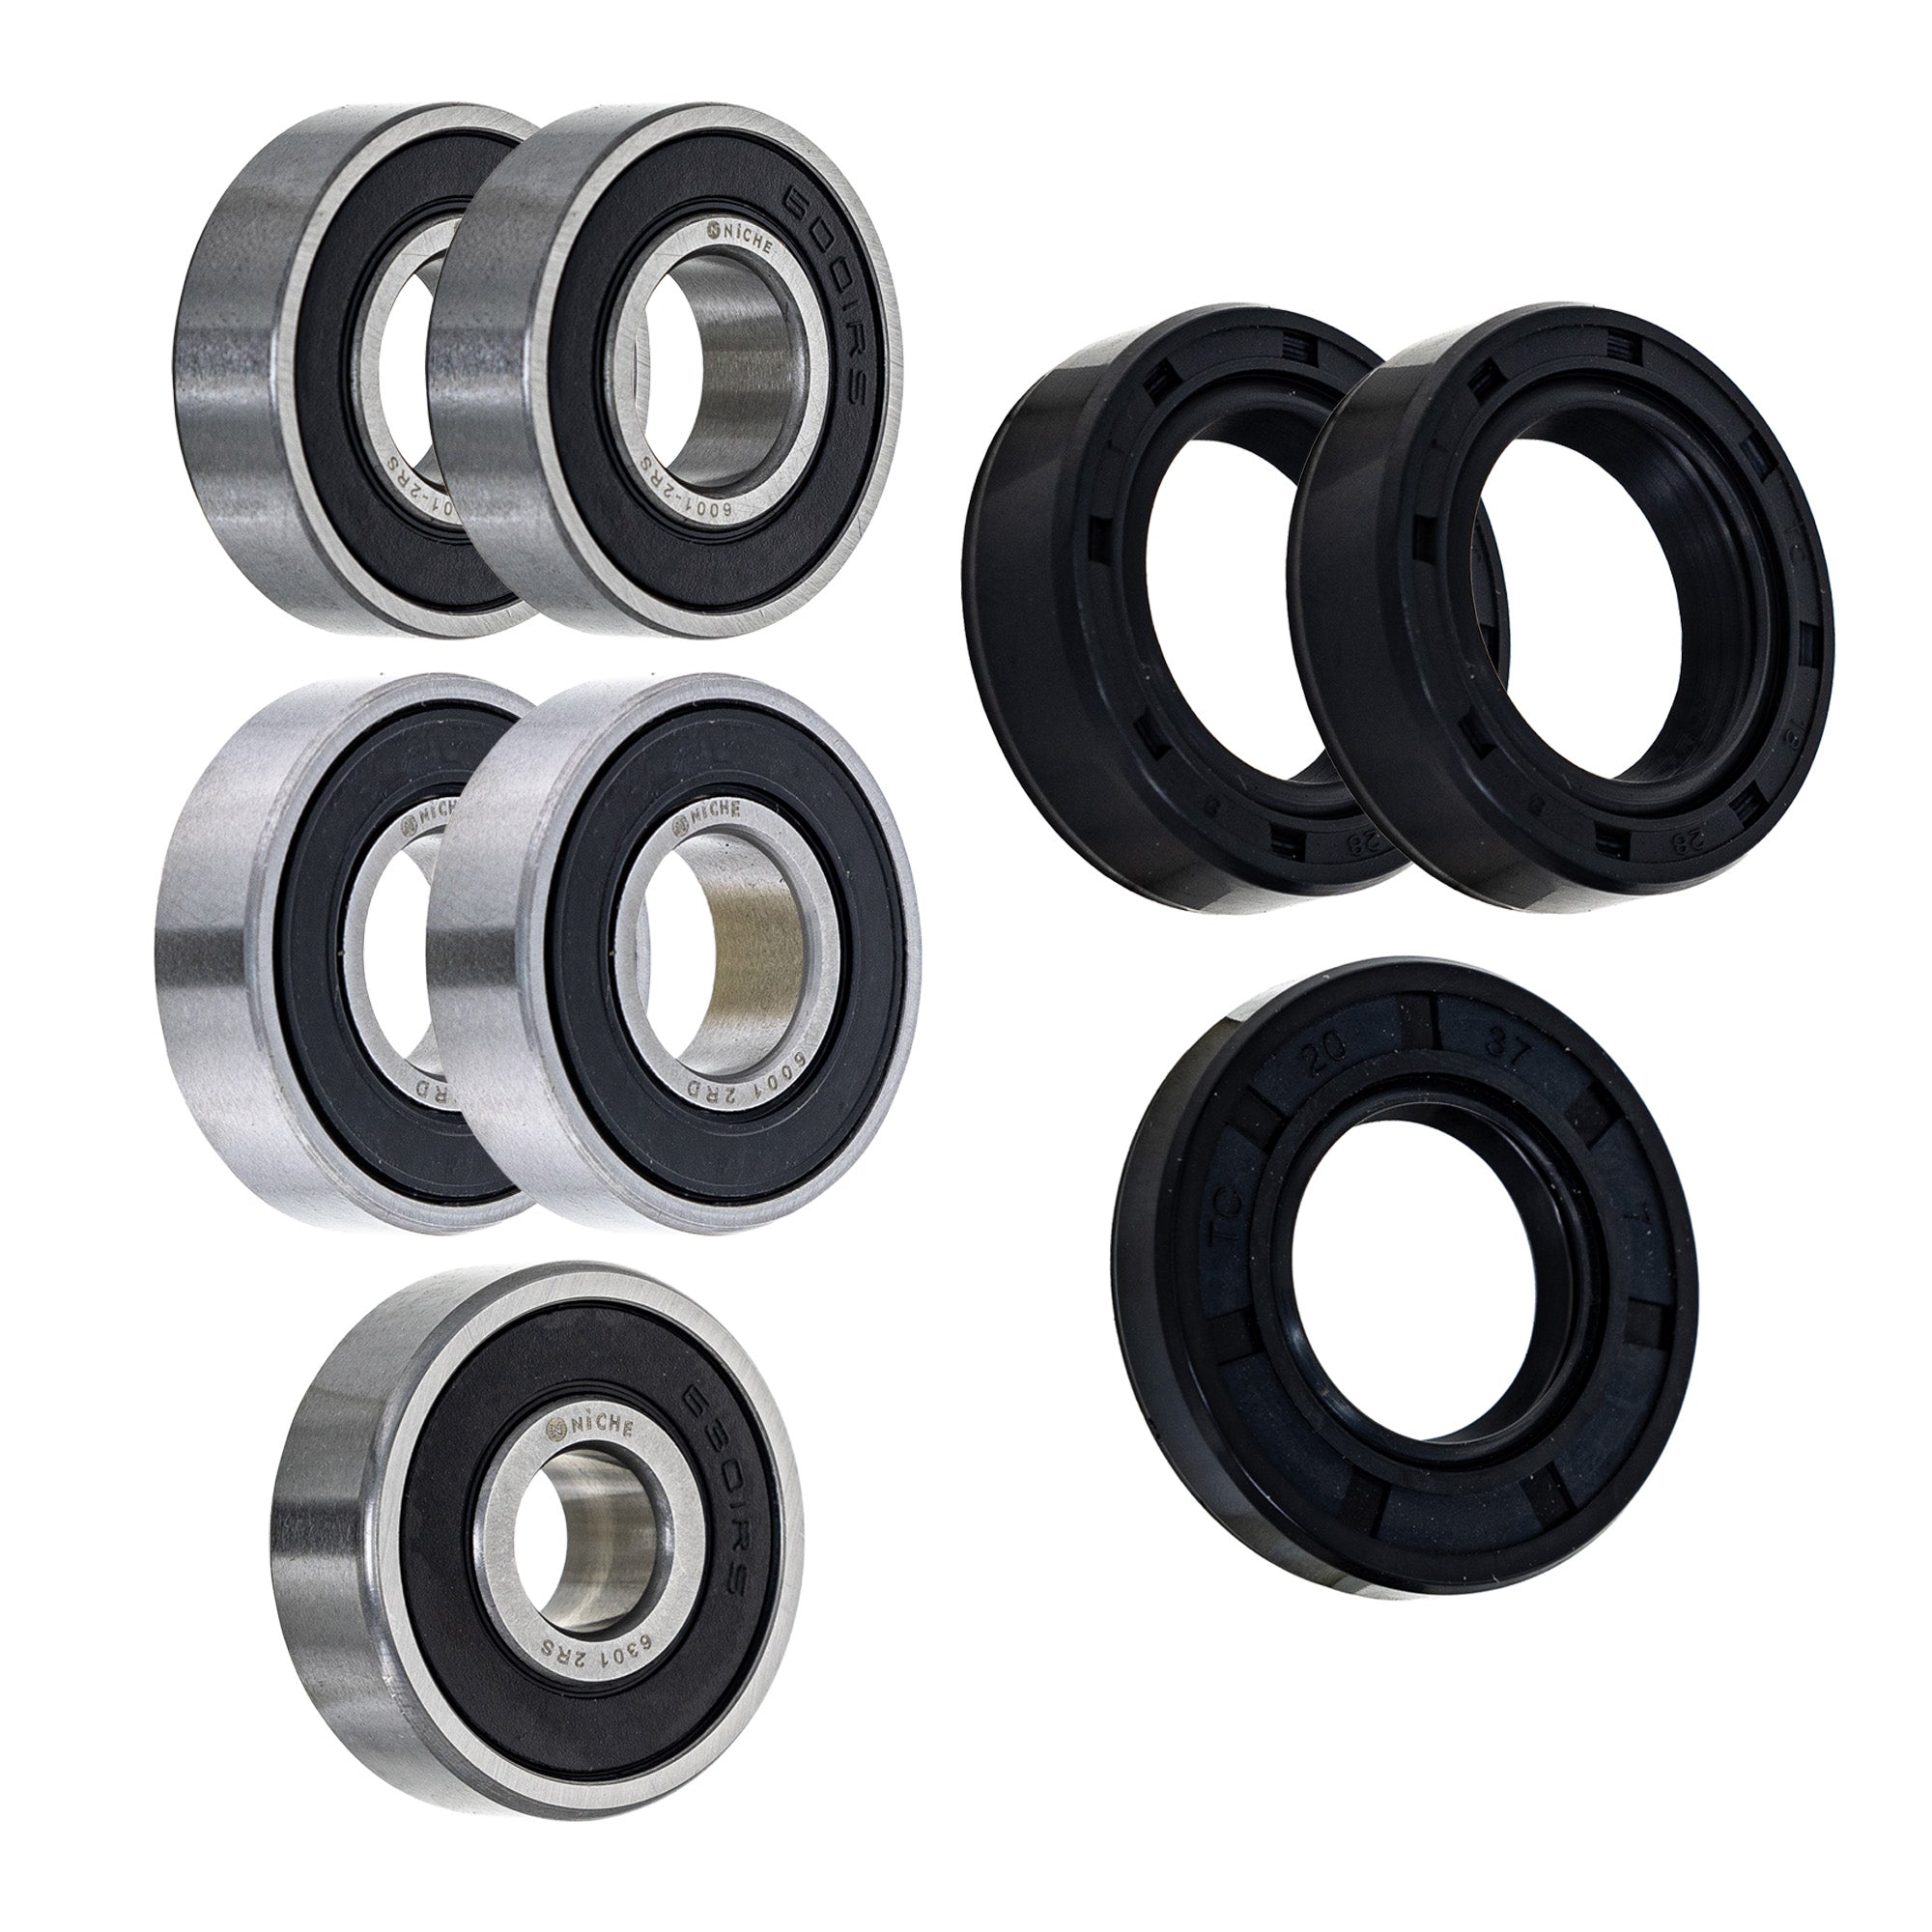 Wheel Bearing Seal Kit for zOTHER Ref No YZ80 NICHE MK1008700